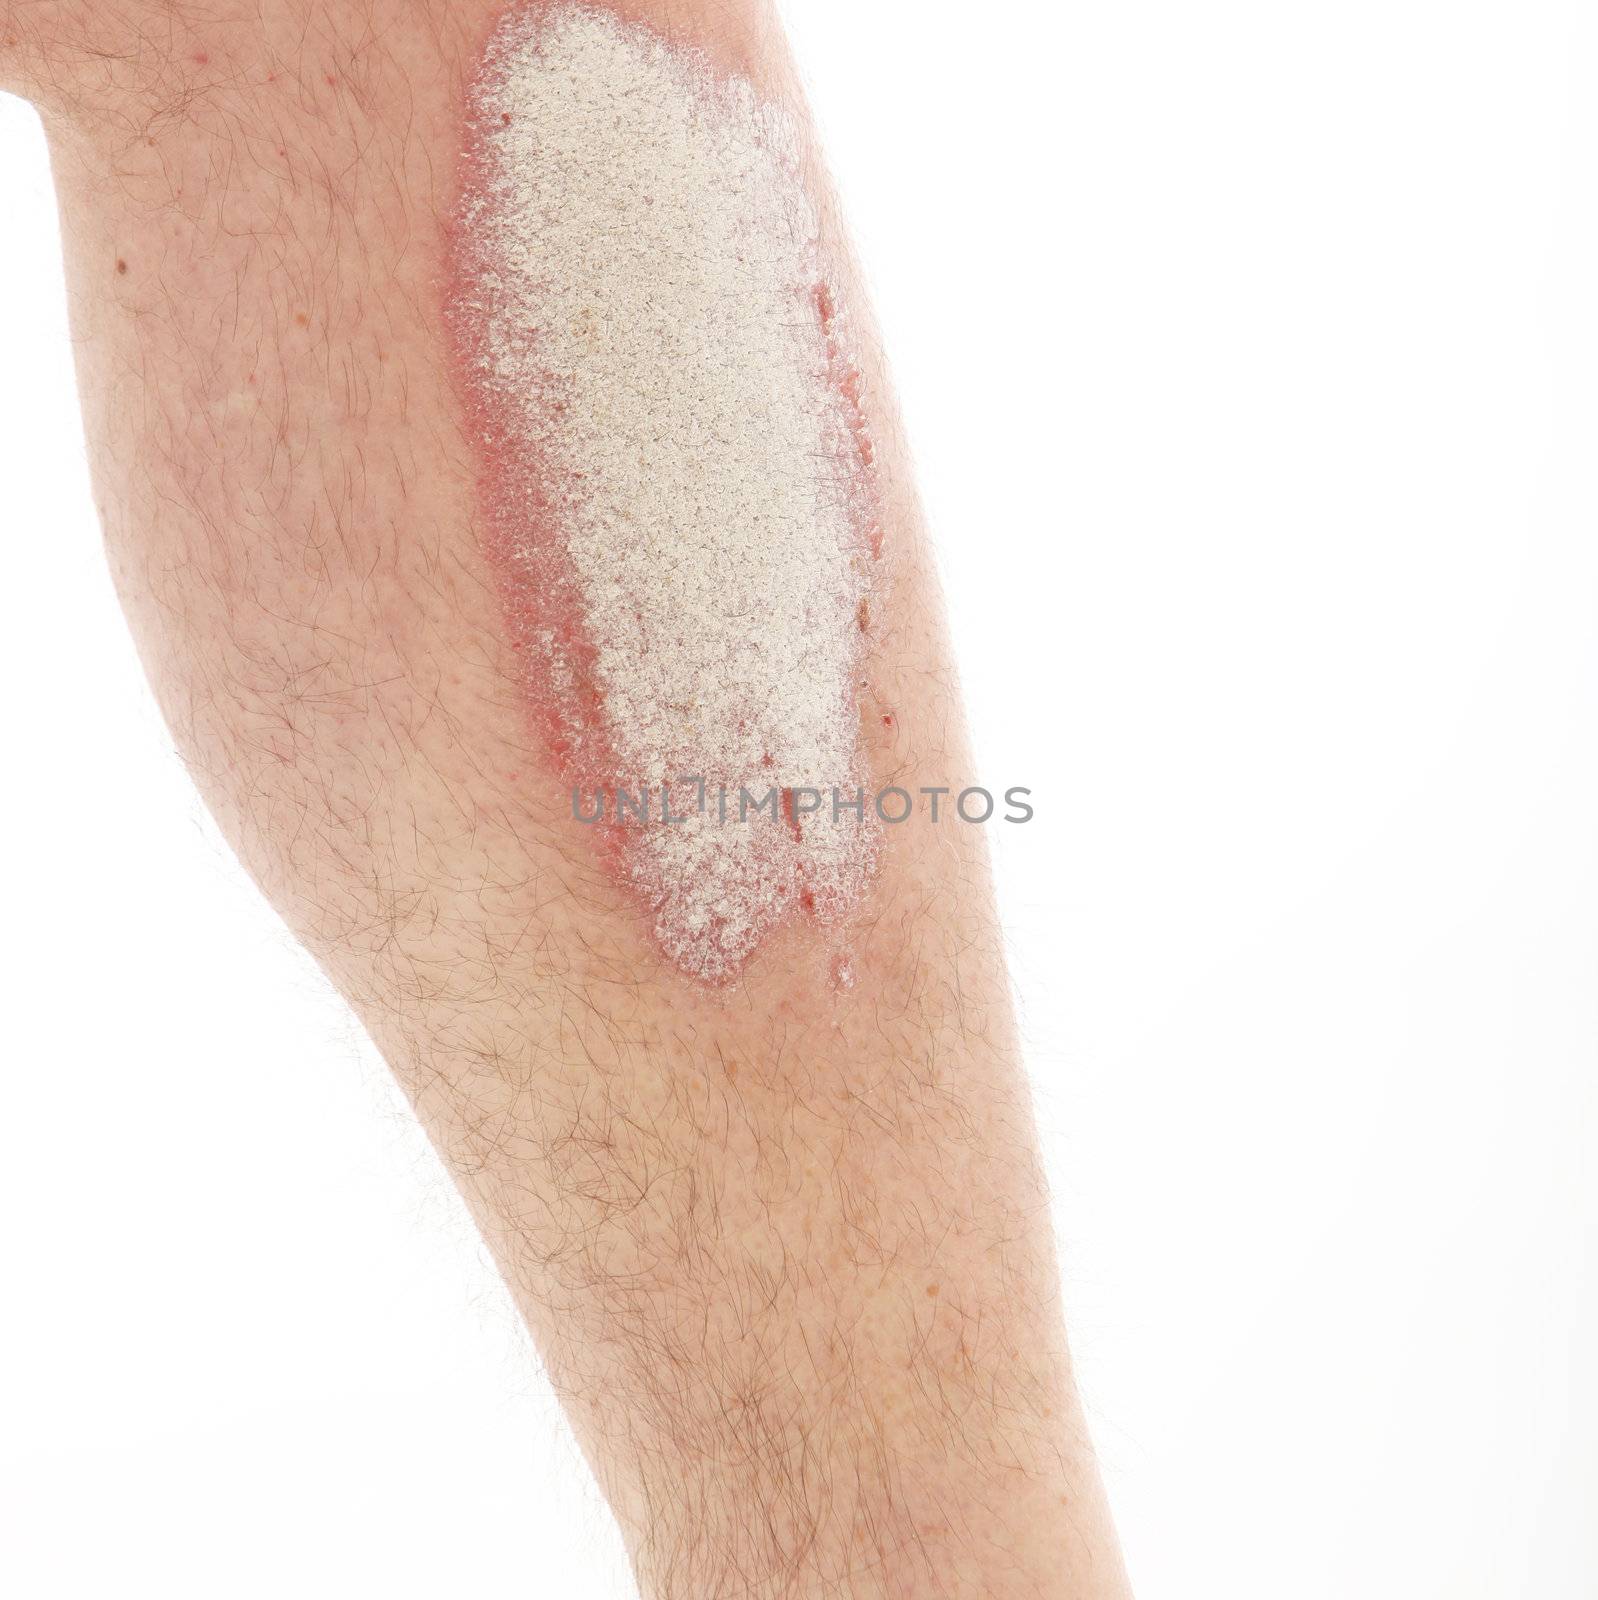 Psoriasis on lower legs - close up up on white background
